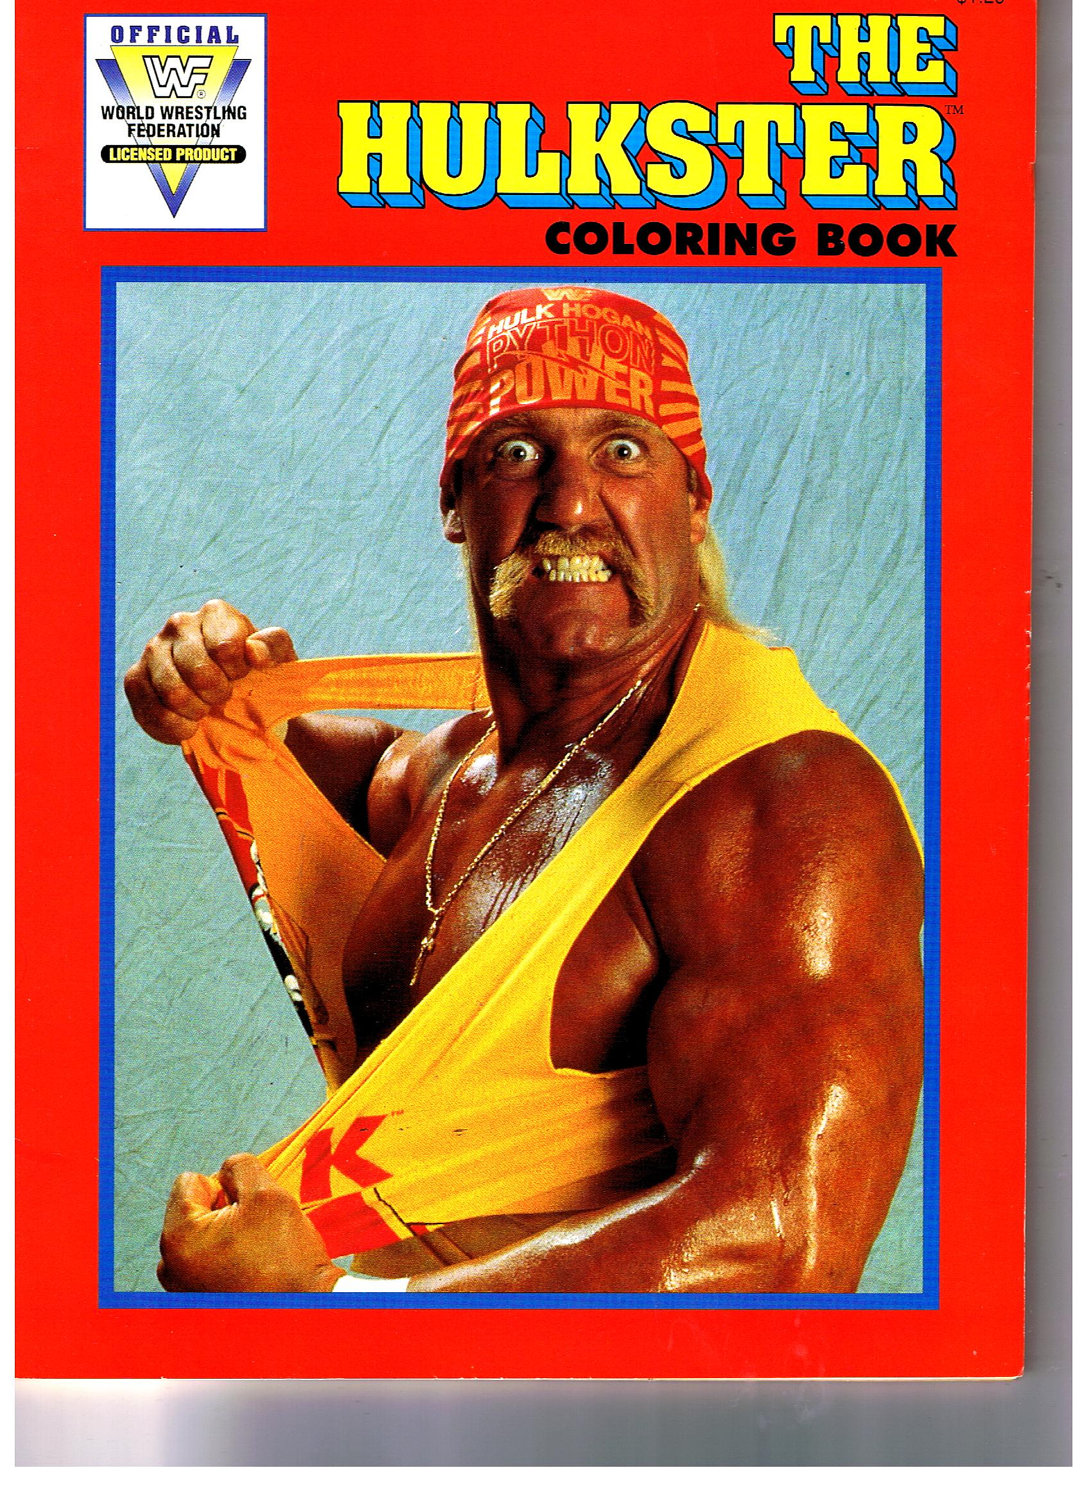 Download Someone Bought This: Hulk Hogan coloring book and Ultimate Warrior Crayon By Numbers set let you ...